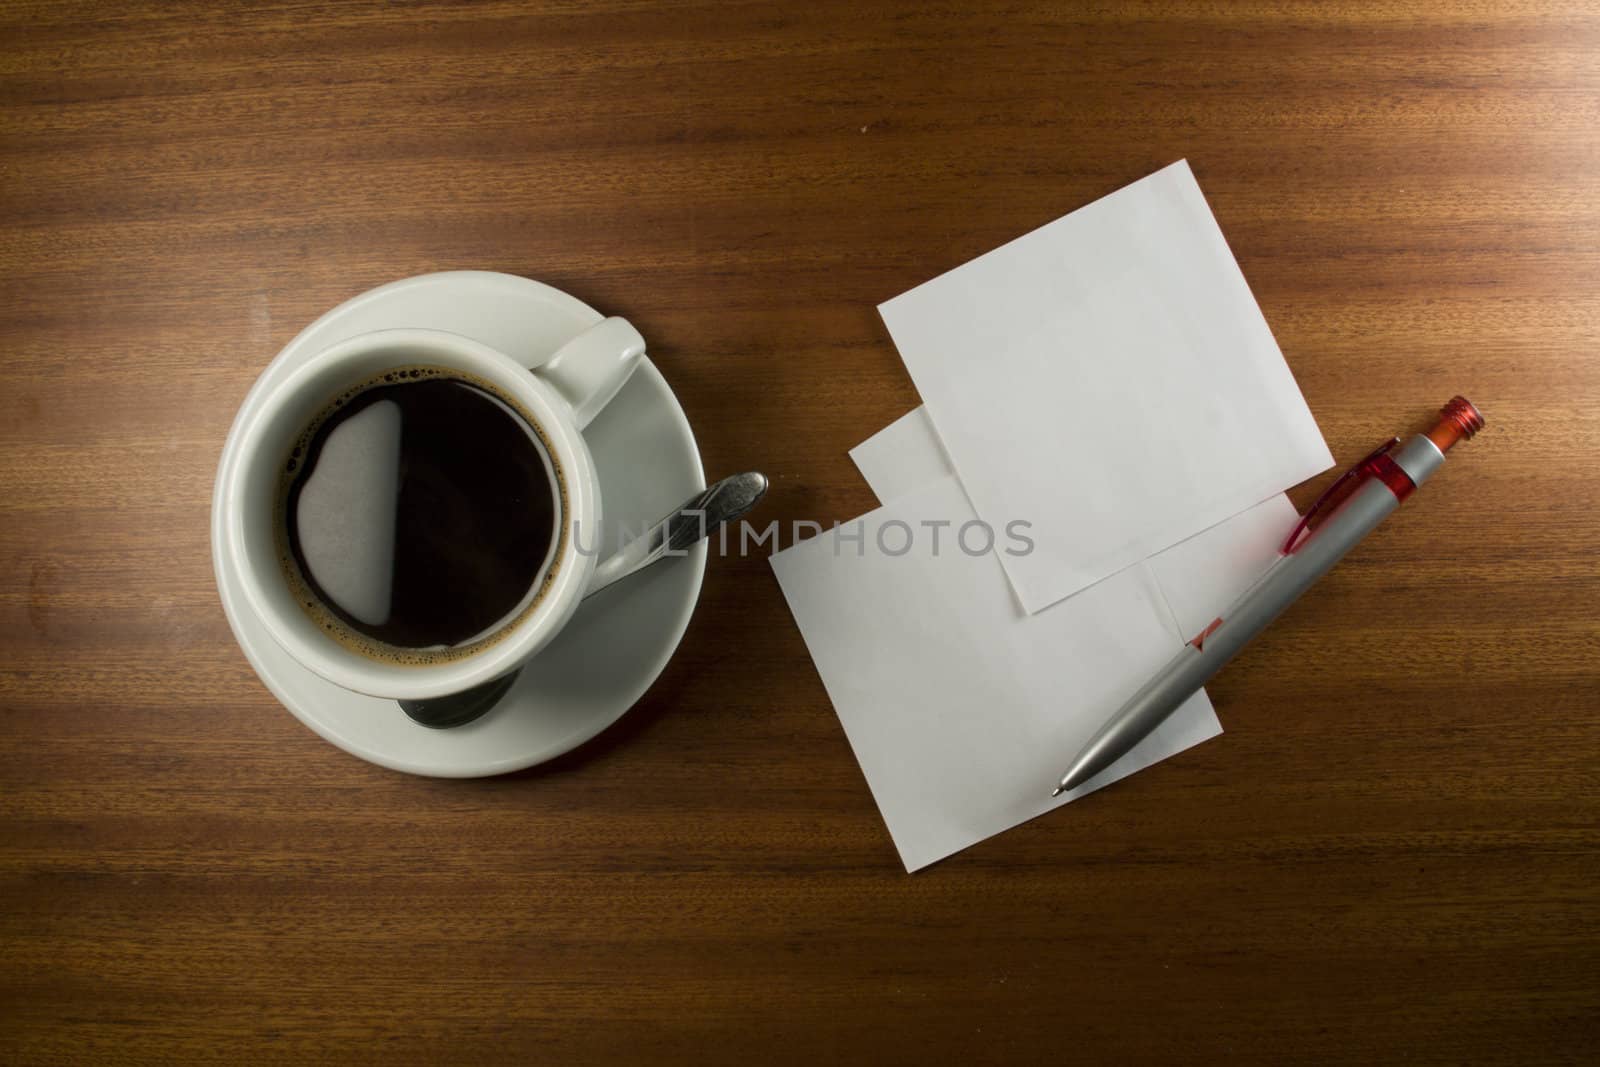 Note Card, Pen and Coffee Cup on Wood Background.